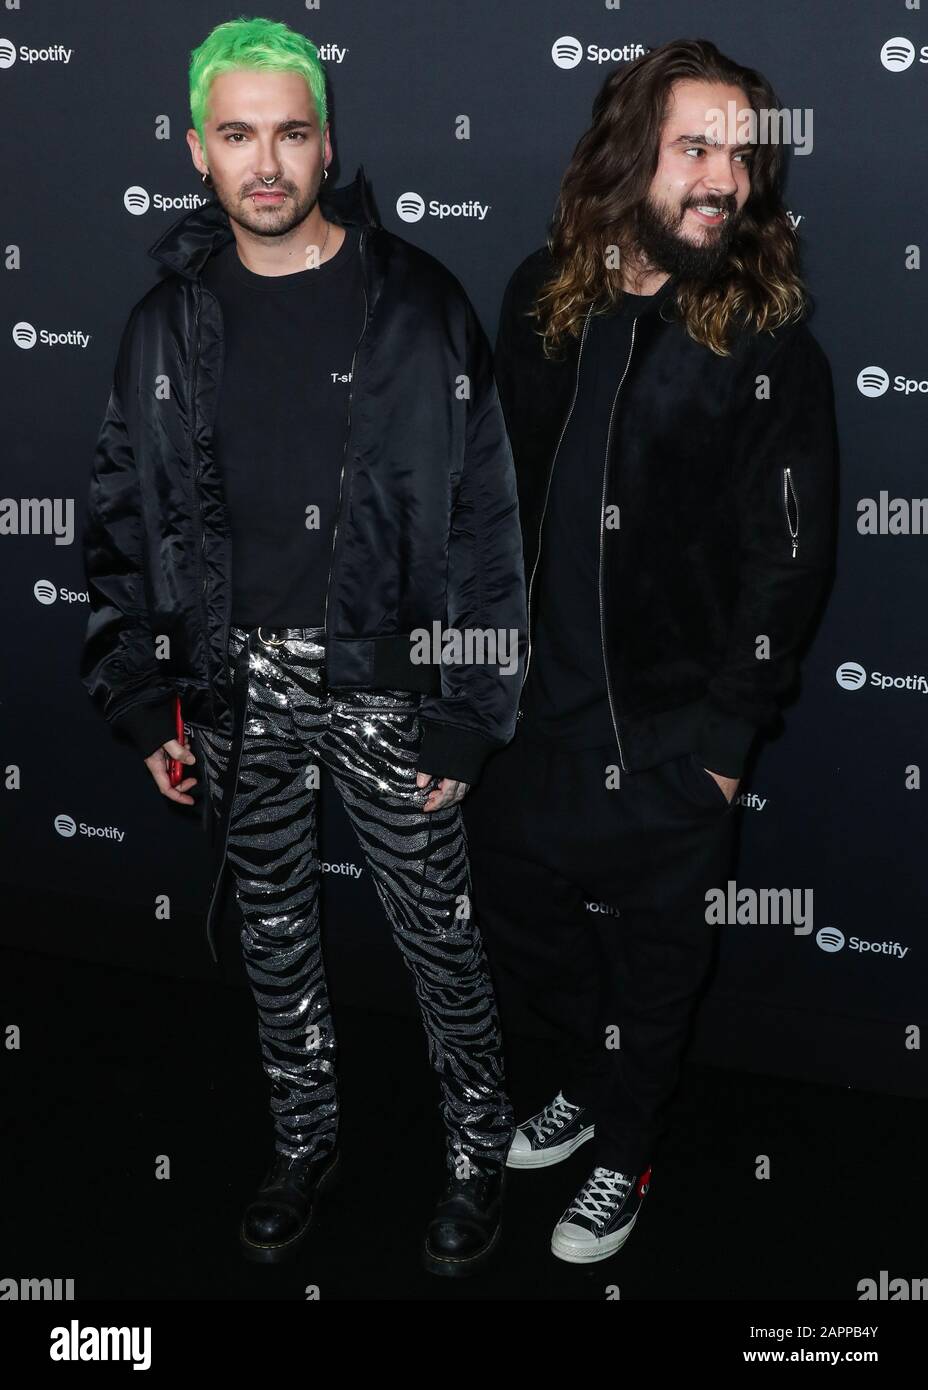 WEST HOLLYWOOD, LOS ANGELES, CALIFORNIA, USA - JANUARY 23: Bill Kaulitz and Tom Kaulitz of Tokio Hotel arrive at the Spotify Best New Artist 2020 Party held at The Lot Studios on January 23, 2020 in West Hollywood, Los Angeles, California, United States. (Photo by Xavier Collin/Image Press Agency) Stock Photo